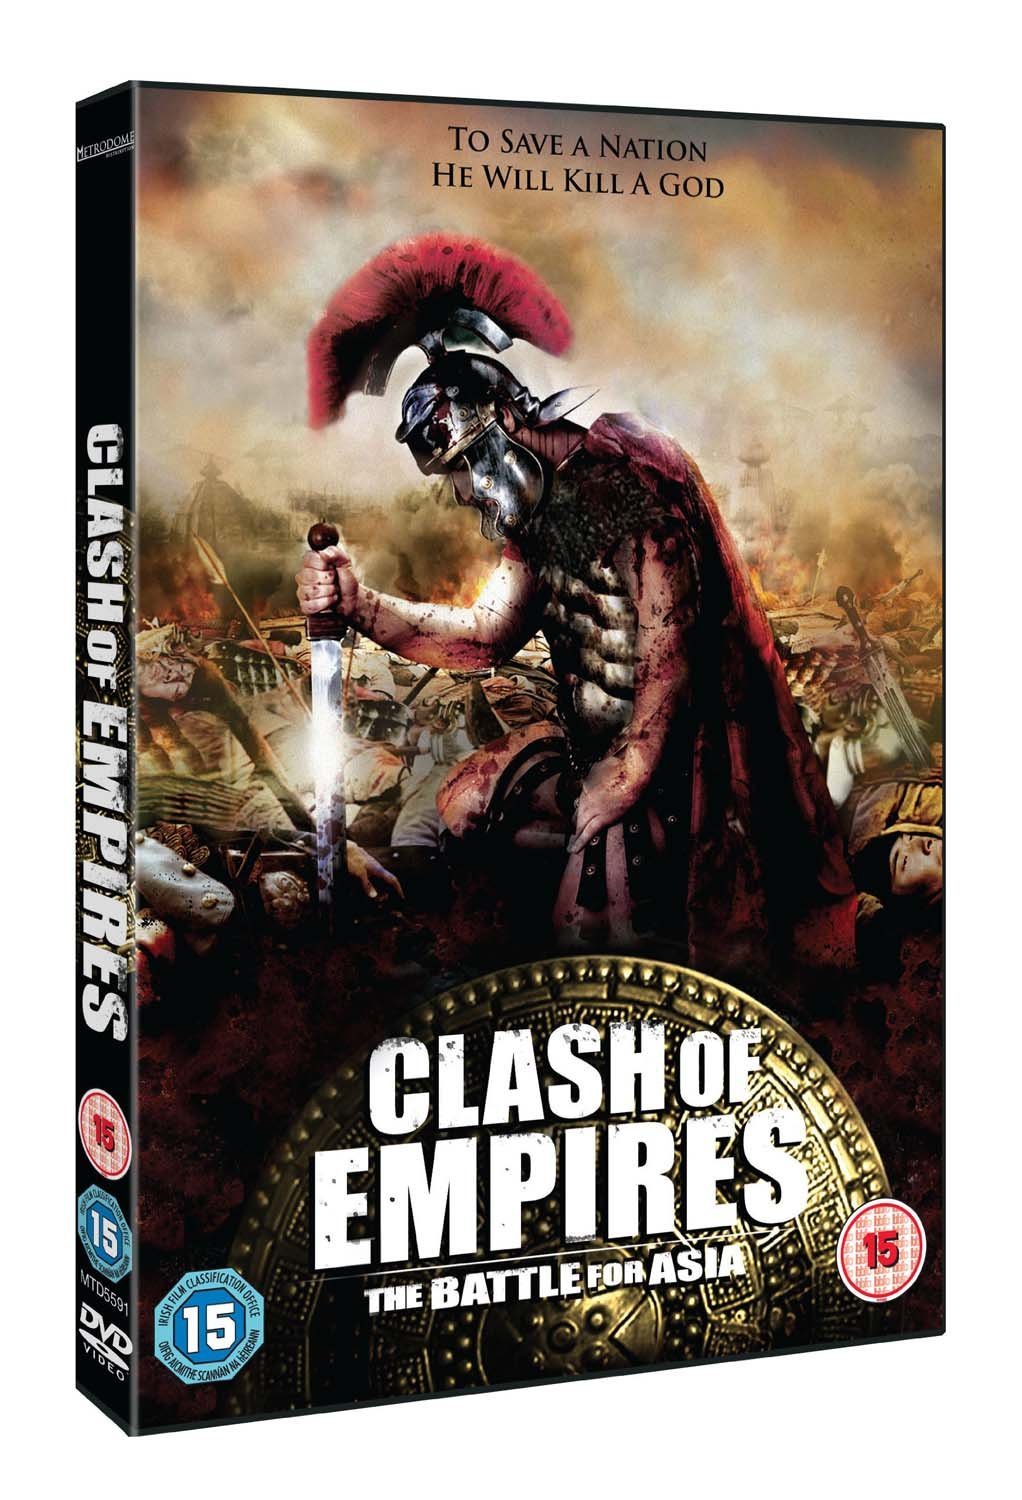 Clash Of Empires: Battle For Asia (DVD)